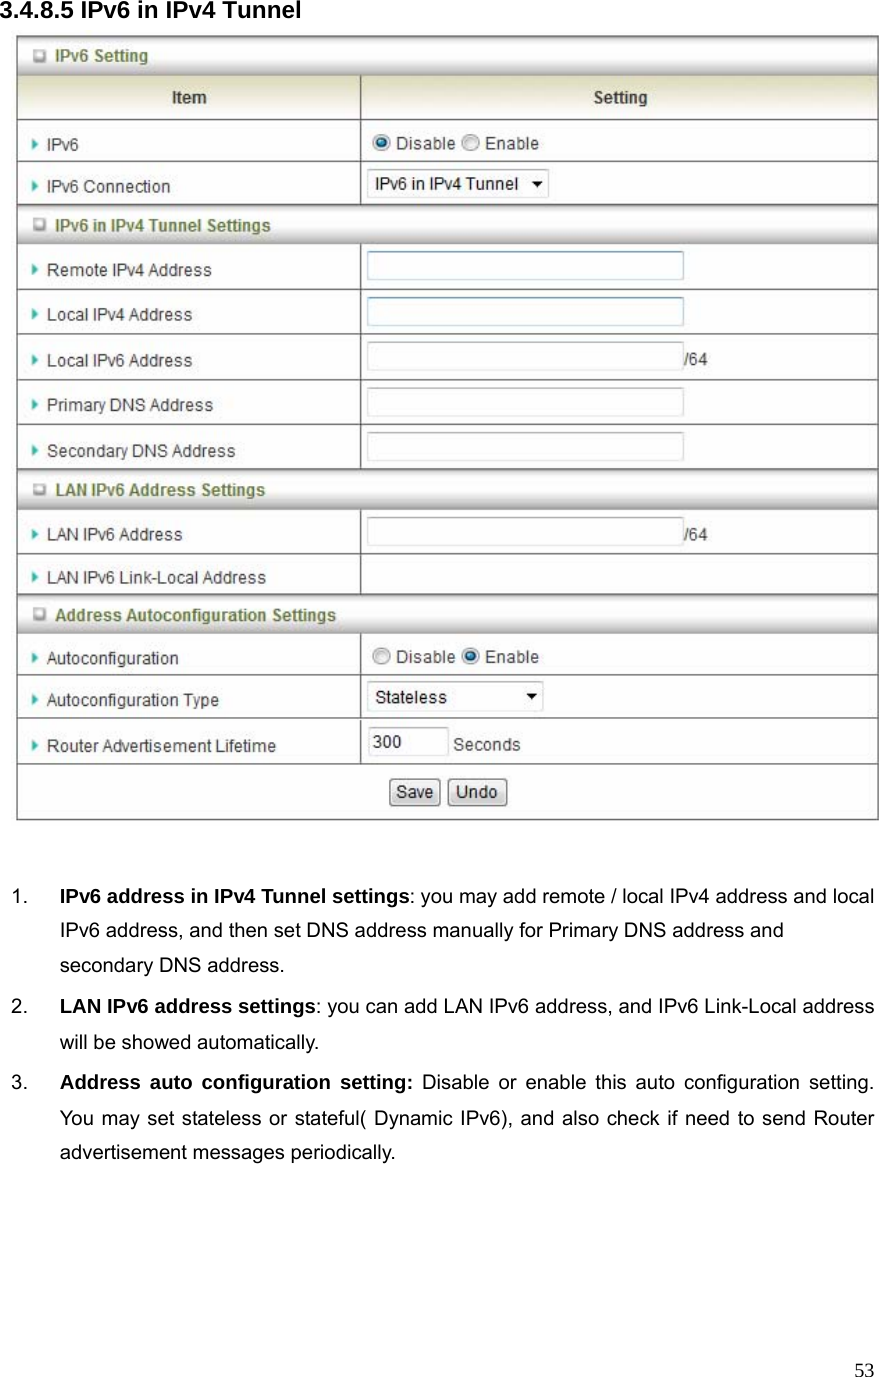  533.4.8.5 IPv6 in IPv4 Tunnel   1.  IPv6 address in IPv4 Tunnel settings: you may add remote / local IPv4 address and local IPv6 address, and then set DNS address manually for Primary DNS address and secondary DNS address. 2.  LAN IPv6 address settings: you can add LAN IPv6 address, and IPv6 Link-Local address will be showed automatically. 3.  Address auto configuration setting: Disable or enable this auto configuration setting. You may set stateless or stateful( Dynamic IPv6), and also check if need to send Router advertisement messages periodically.    